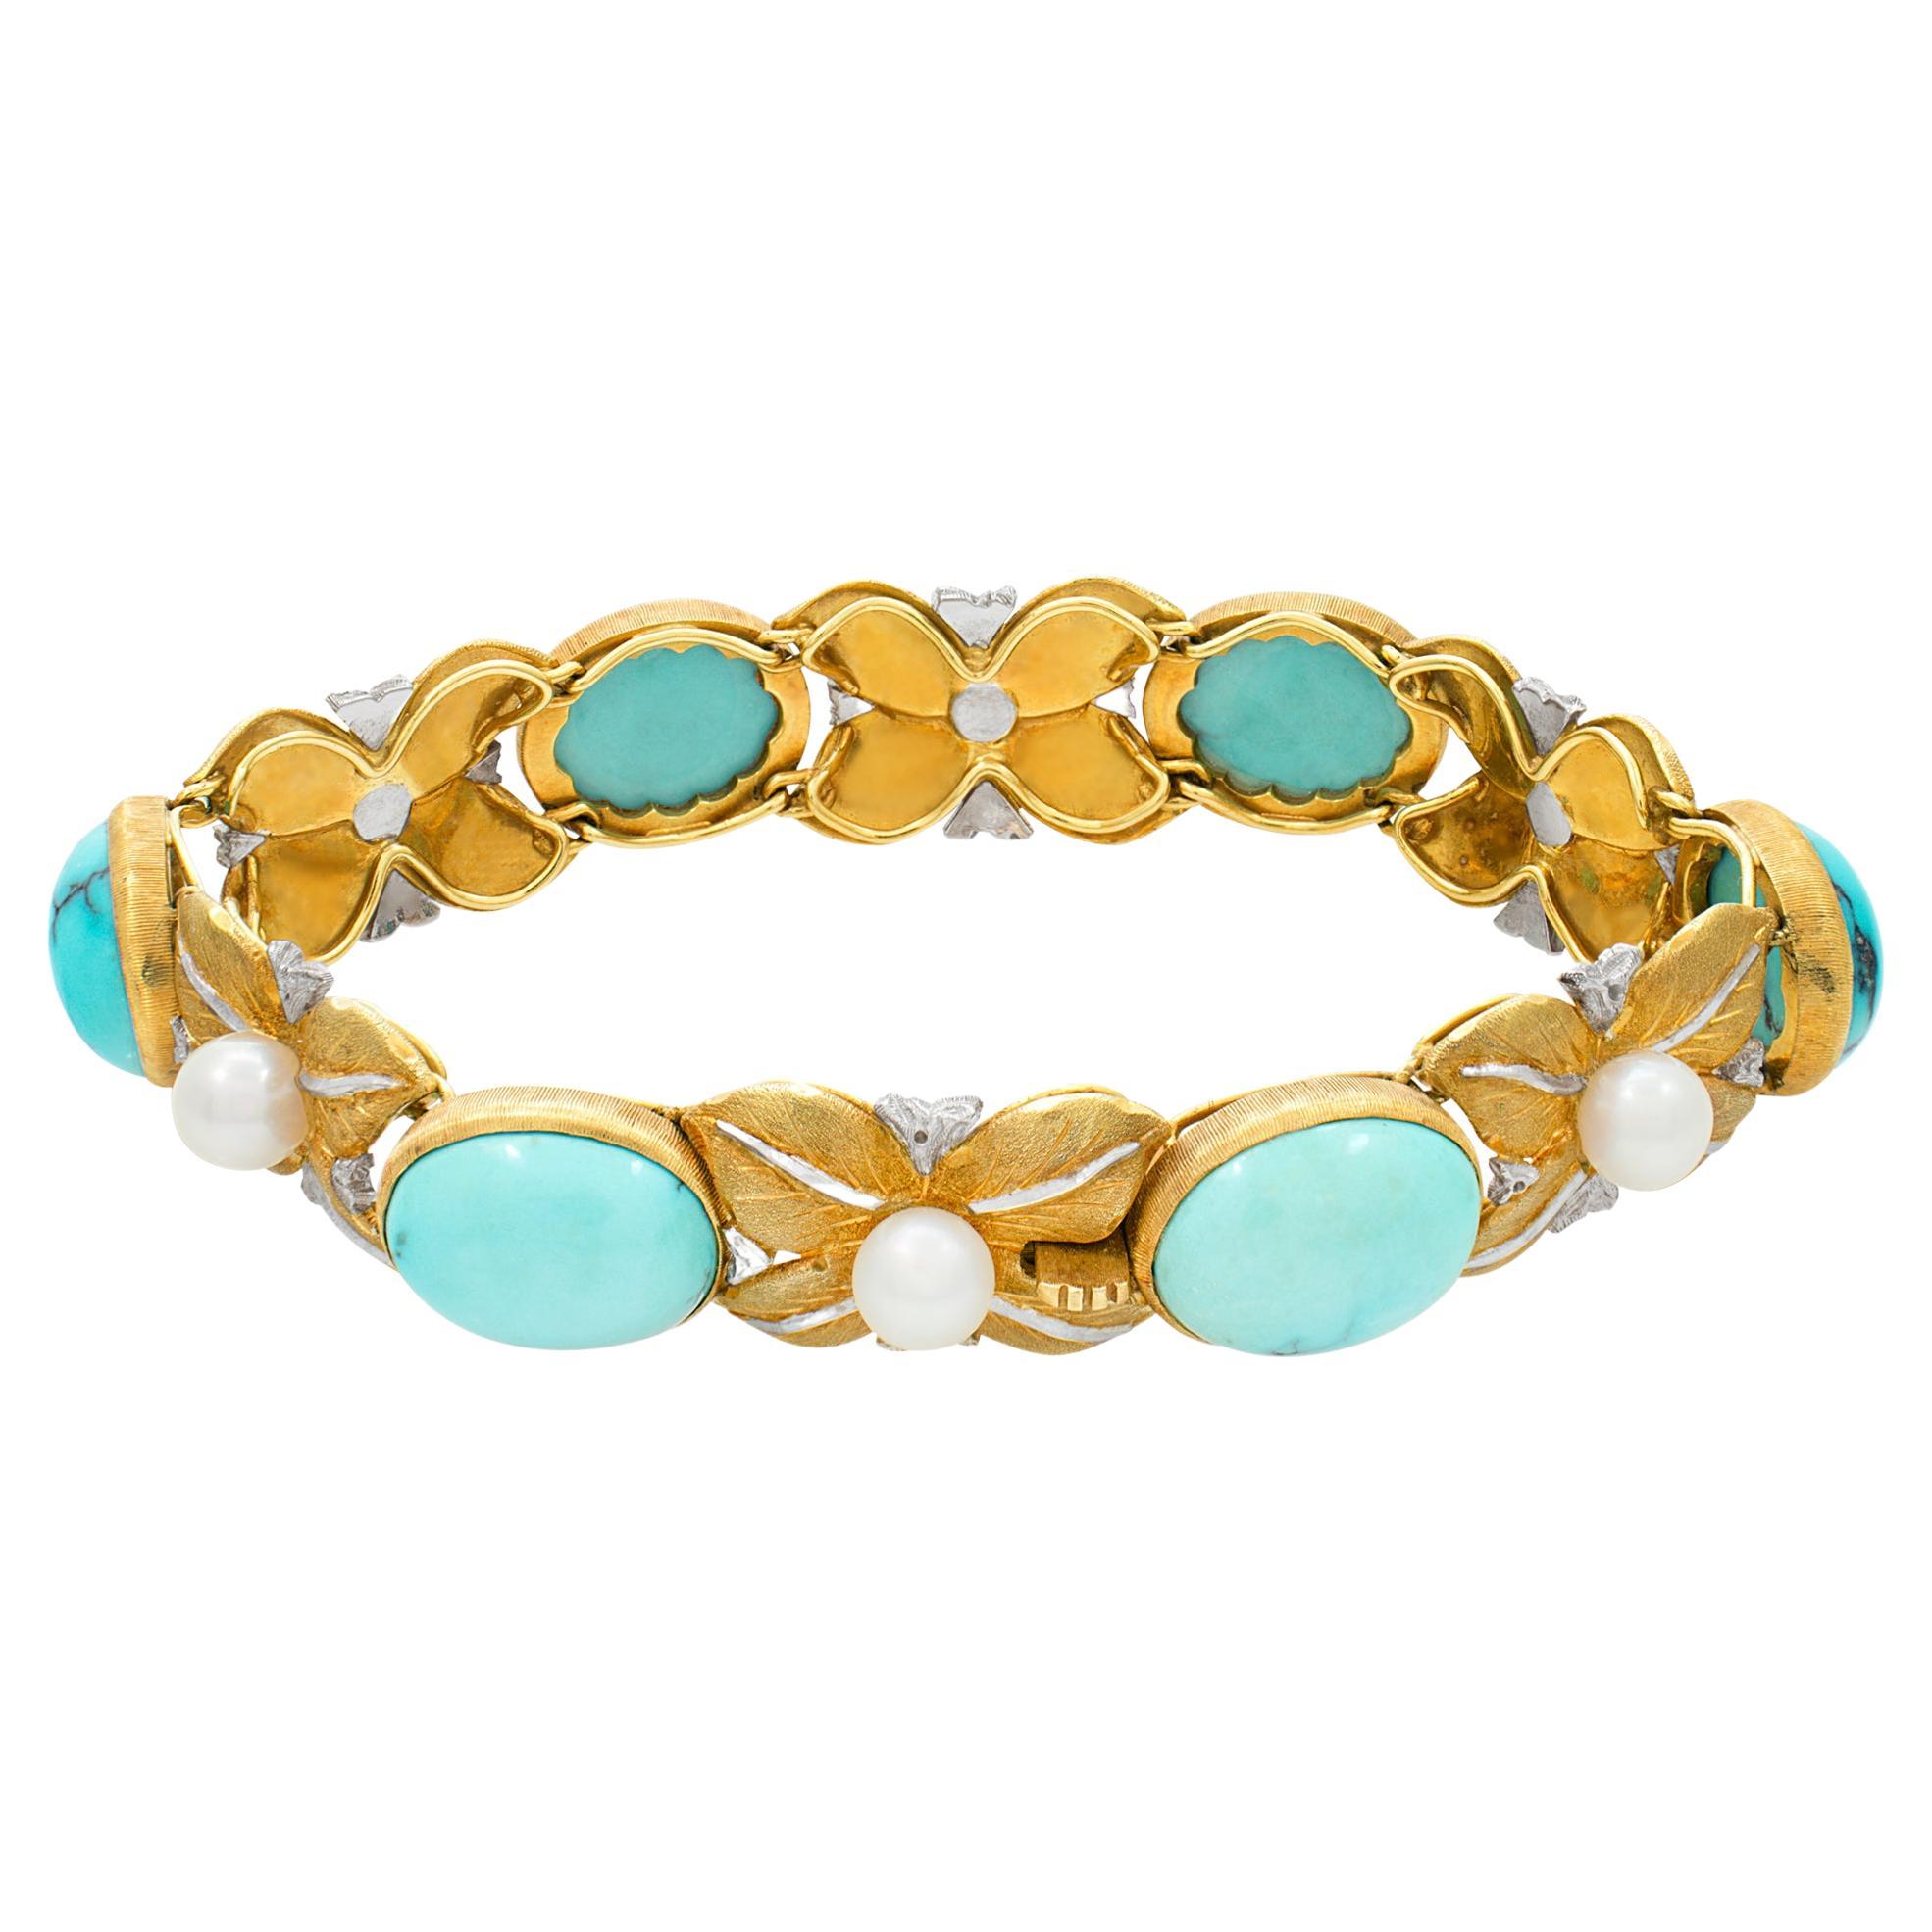 Buccellatti Leaf Motif Pearl and Turquoise Bracelet in 18k For Sale